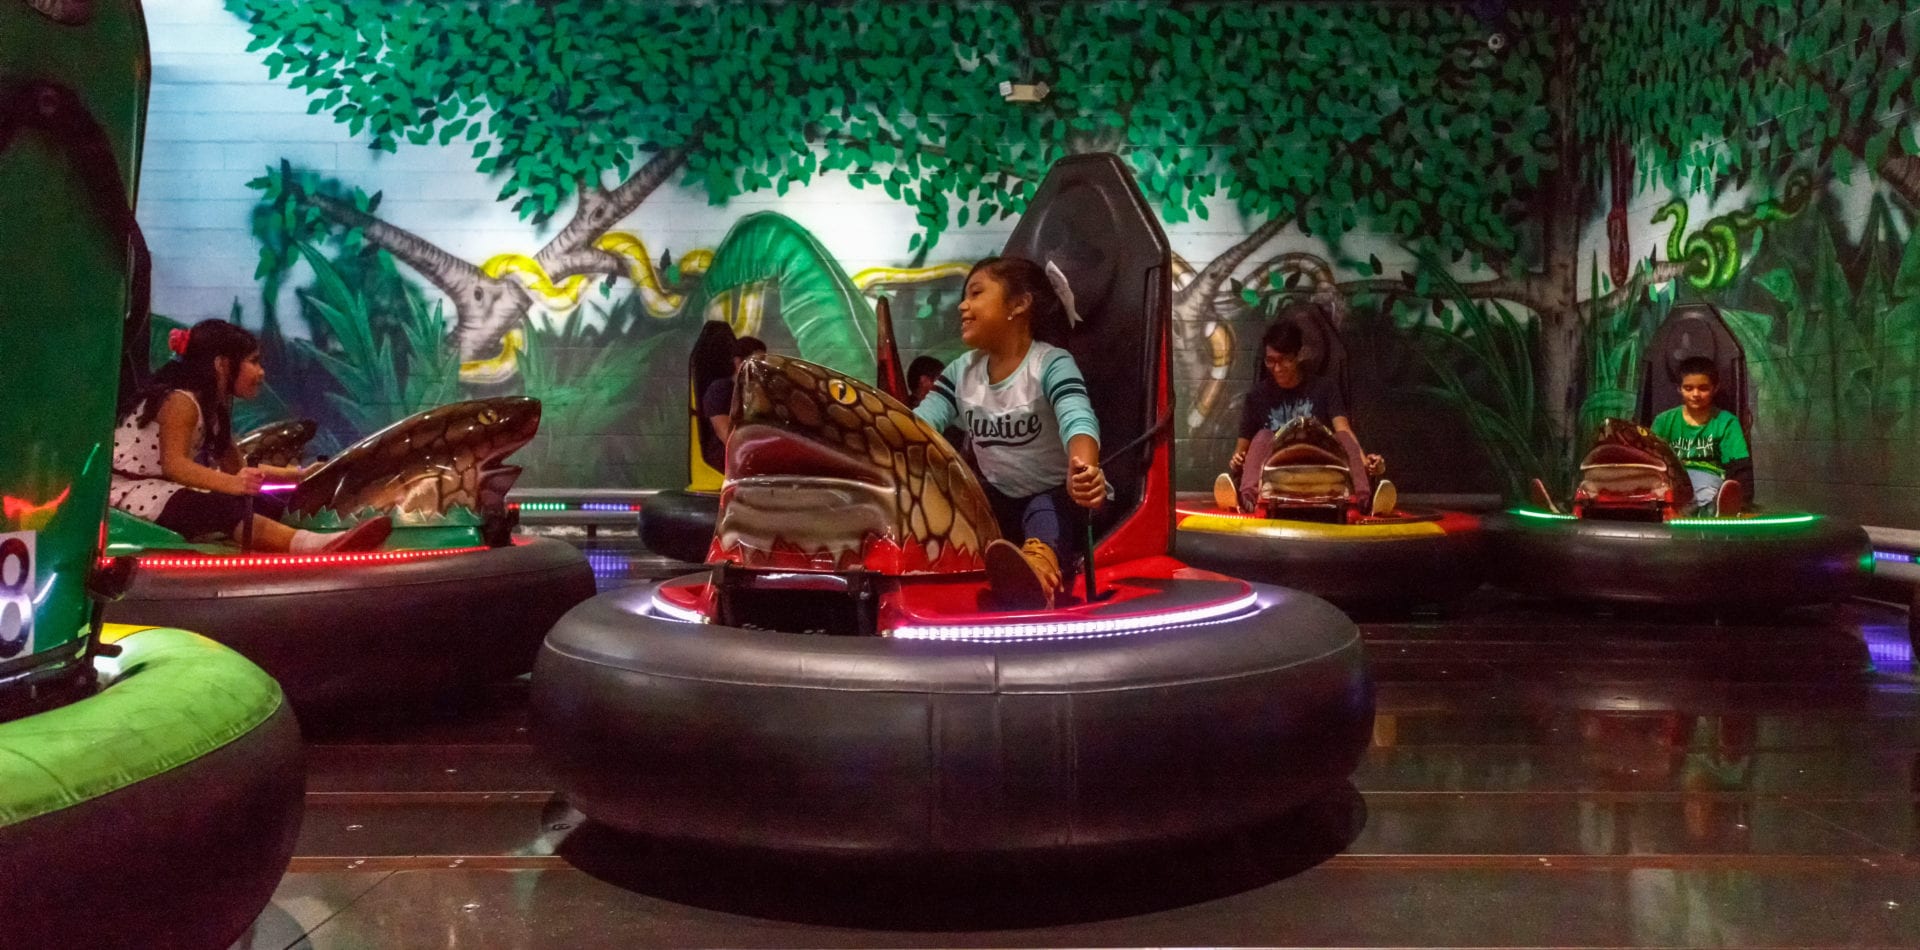 A child rides in an inflatable bumper car.